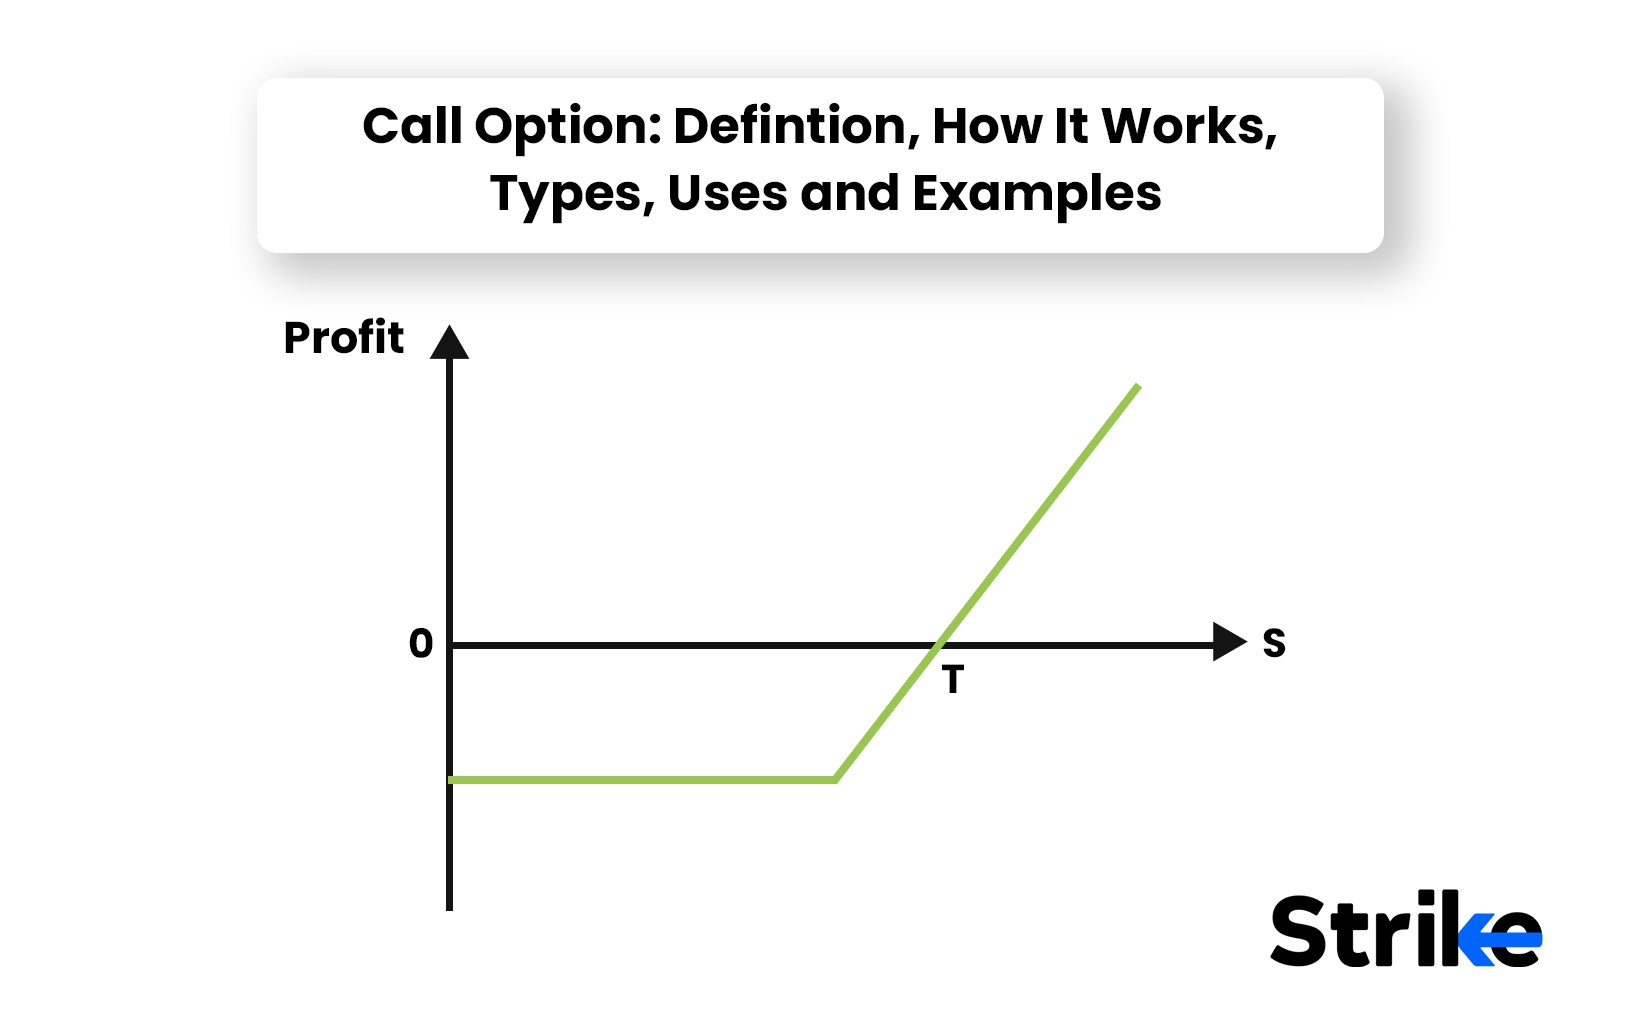 Call Option: Defintion, How It Works, Types, Uses and Examples